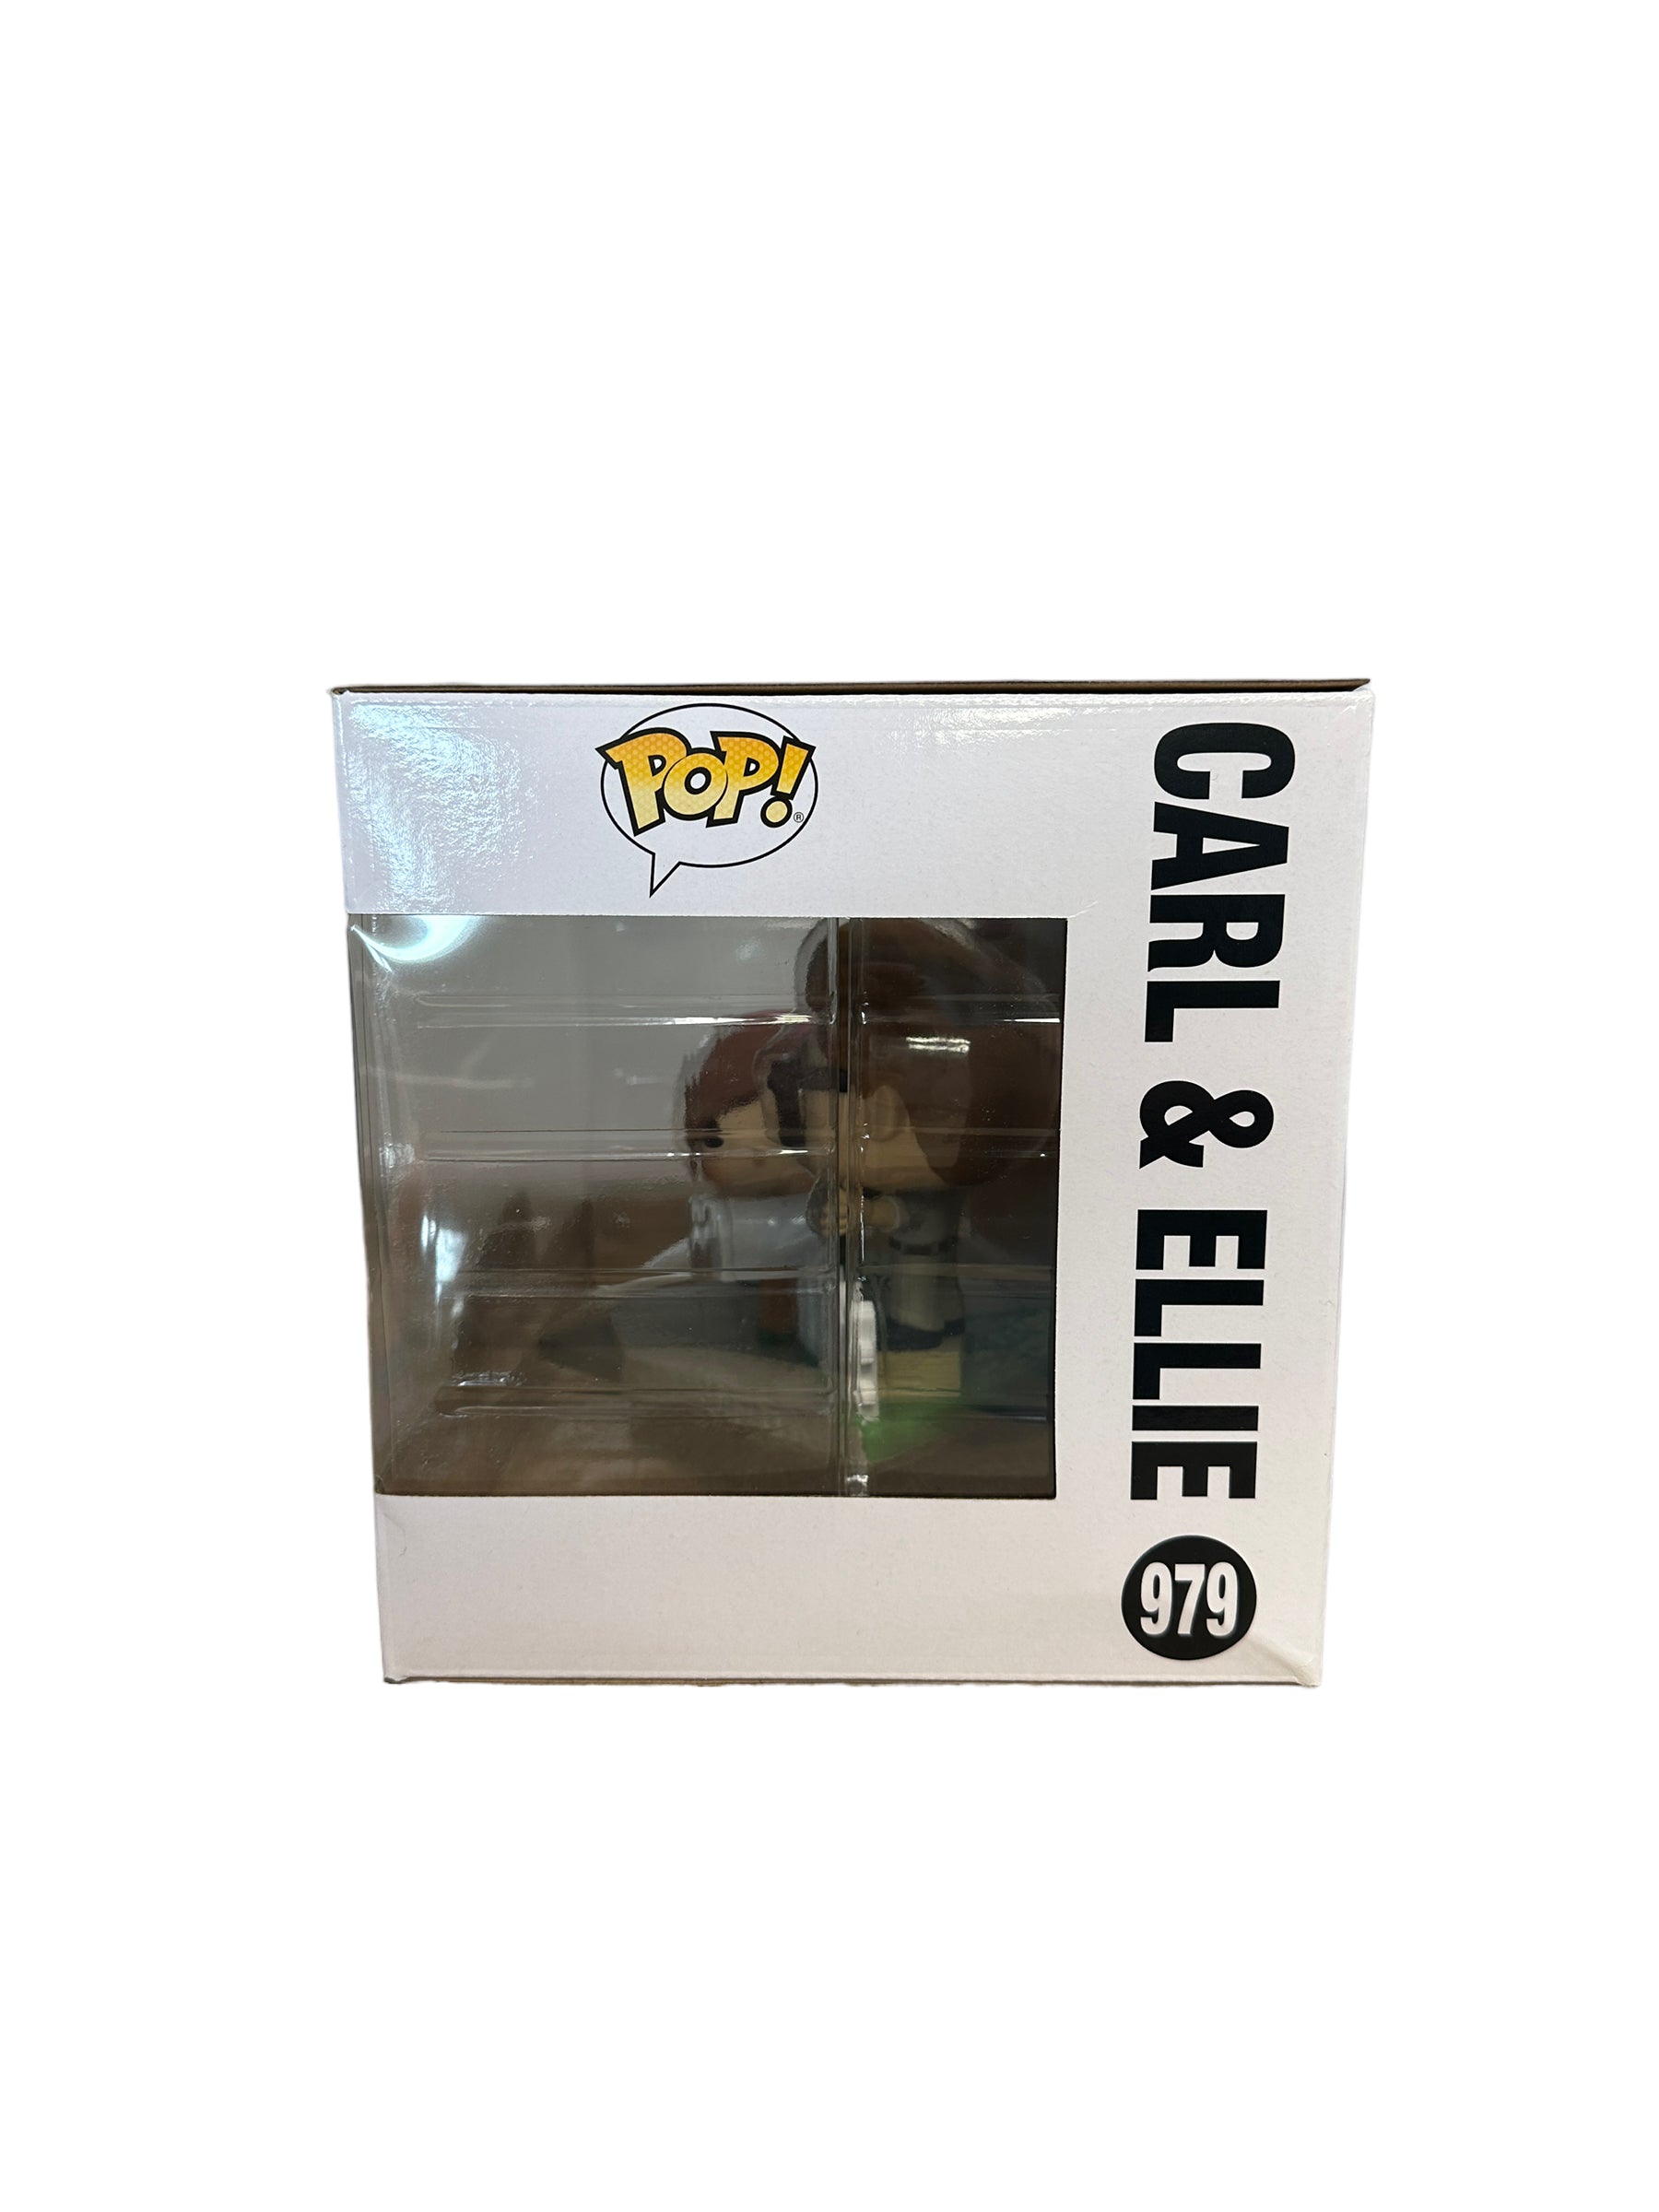  Funko POP! Movie Moments Disney Pixar's UP Carl and Ellie 979  NYCC 2020 Shared Exclusive : Toys & Games